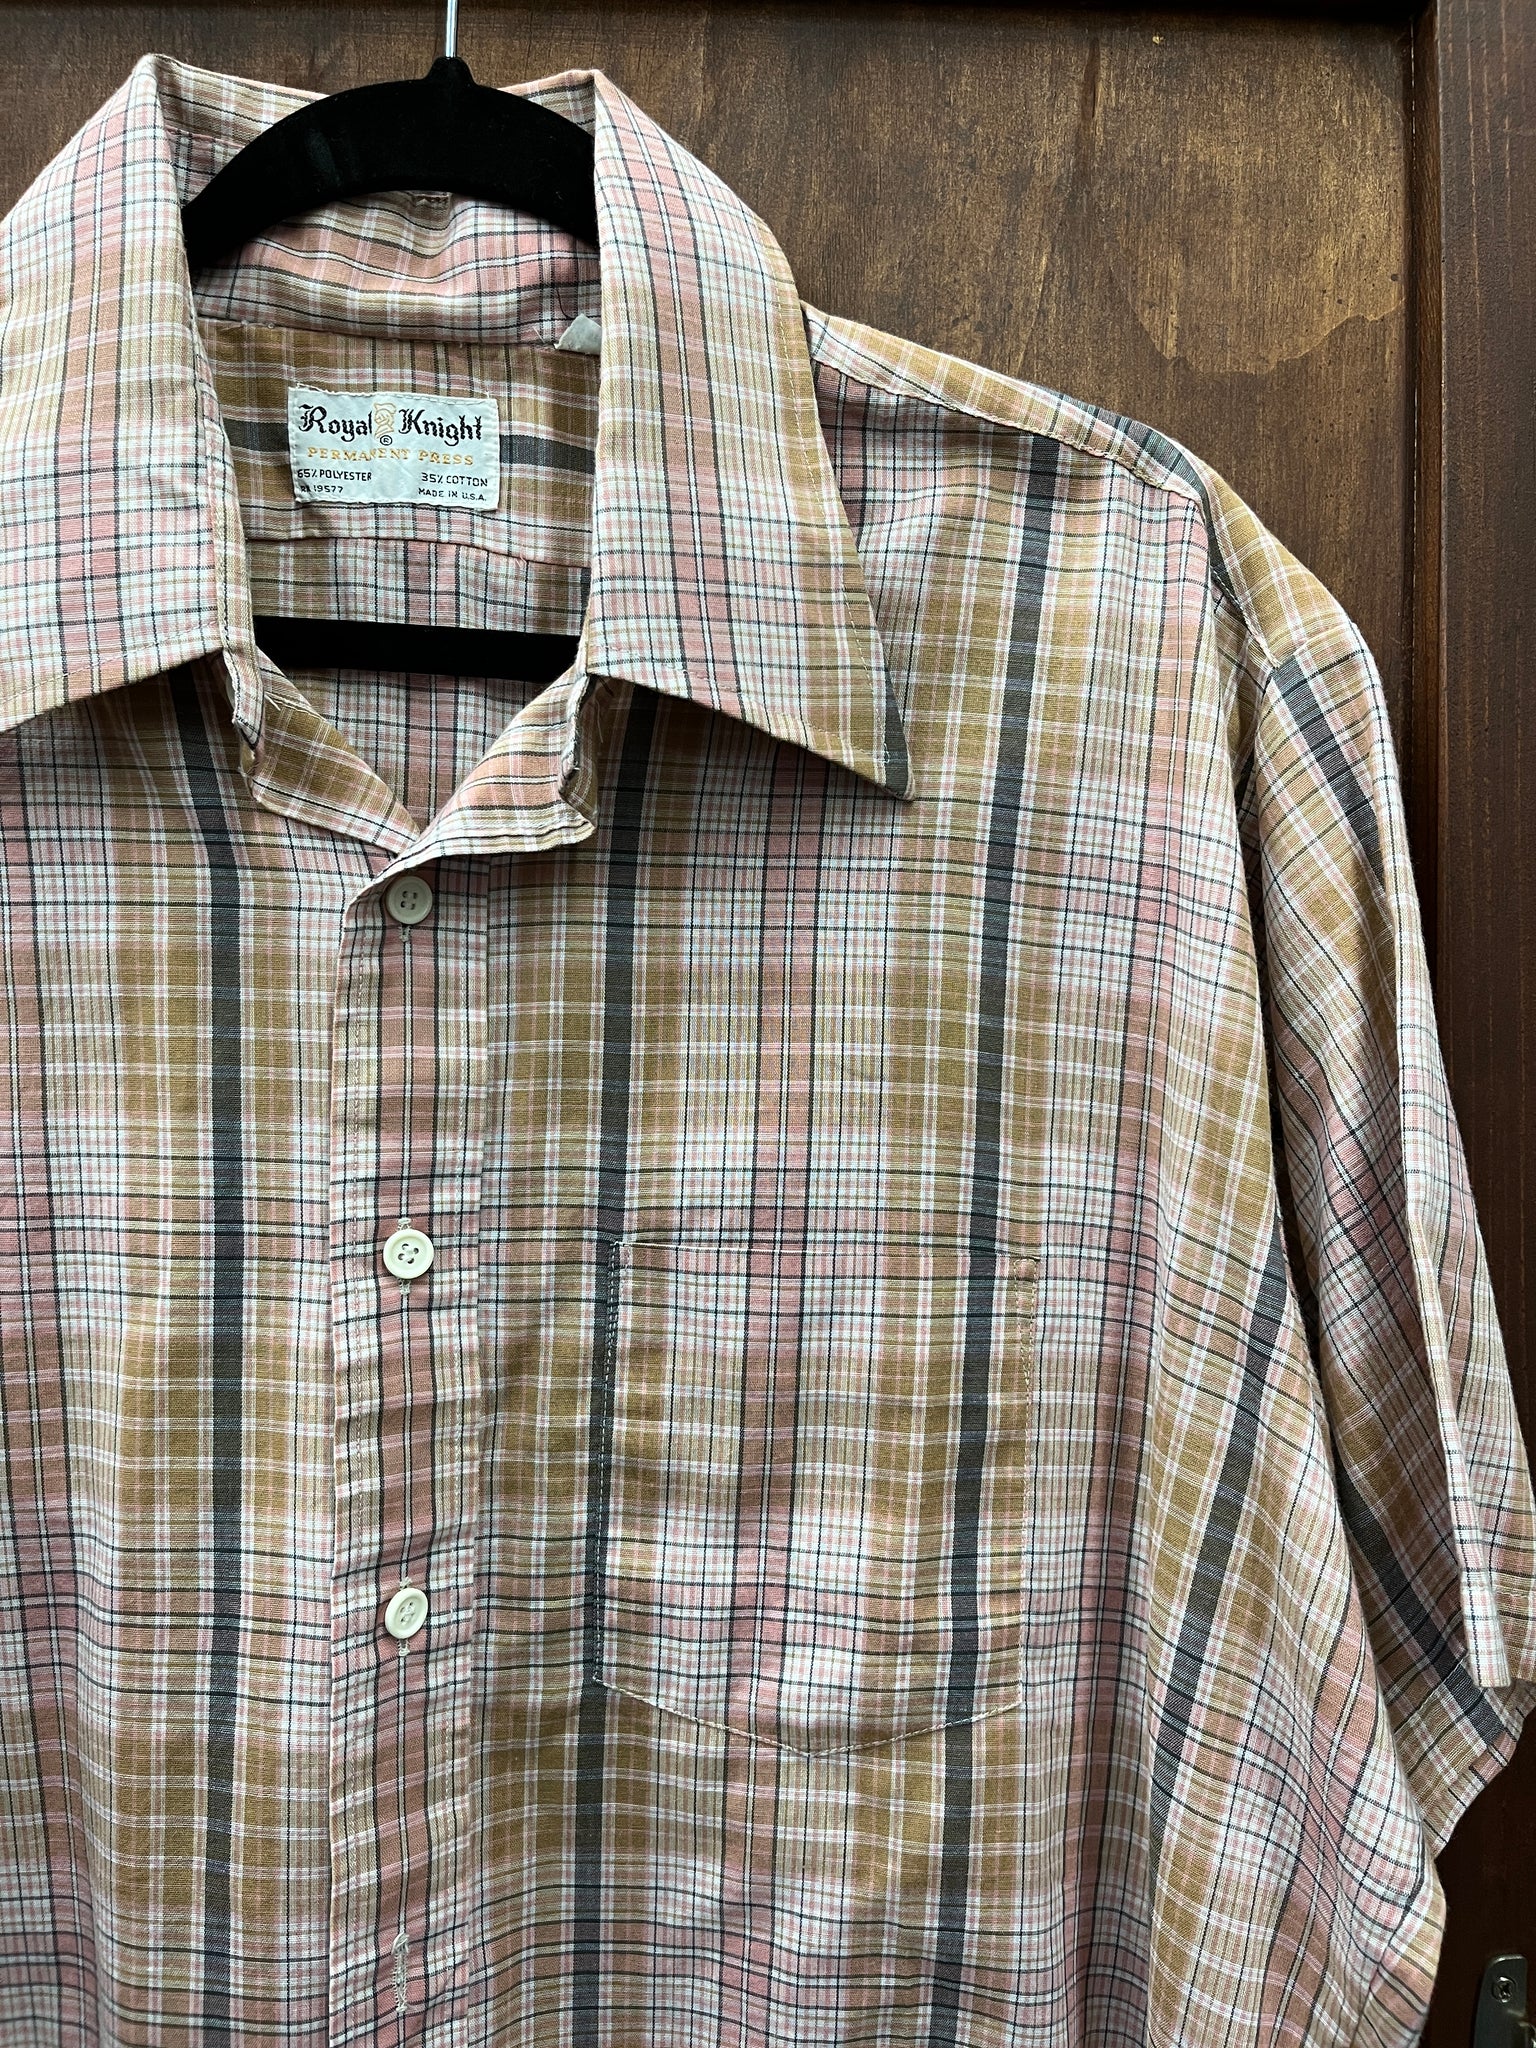 1970s MENS TOP-Royal Knight-pink grey plaid western s/s